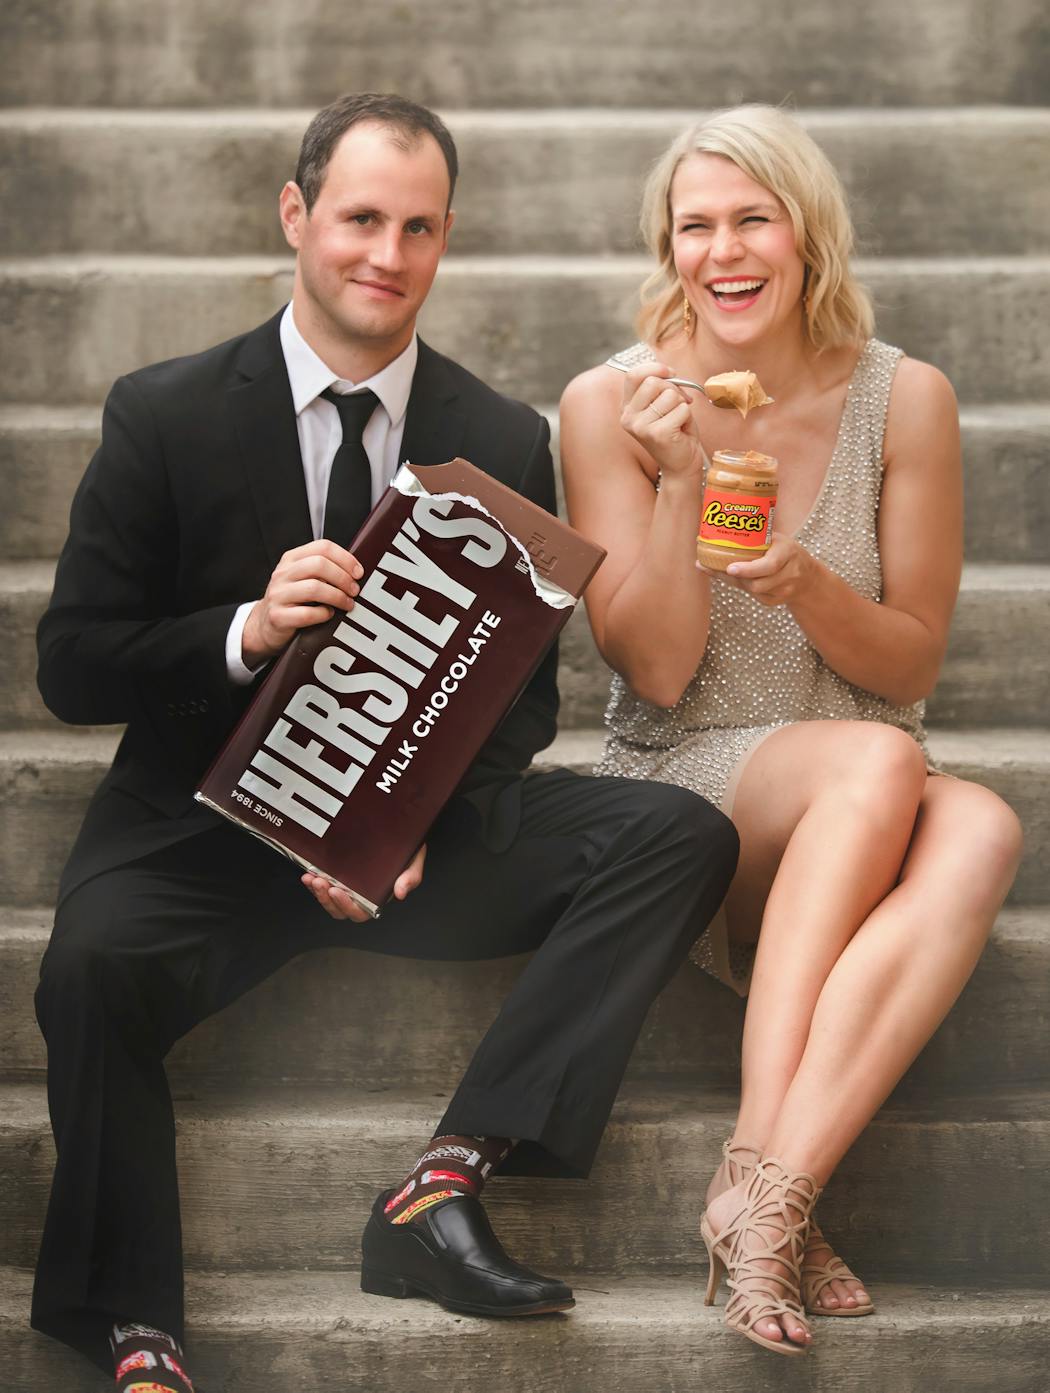 Craig Hirschey and Jenny Ries are planning their upcoming wedding with a little help from Hersheys Co.